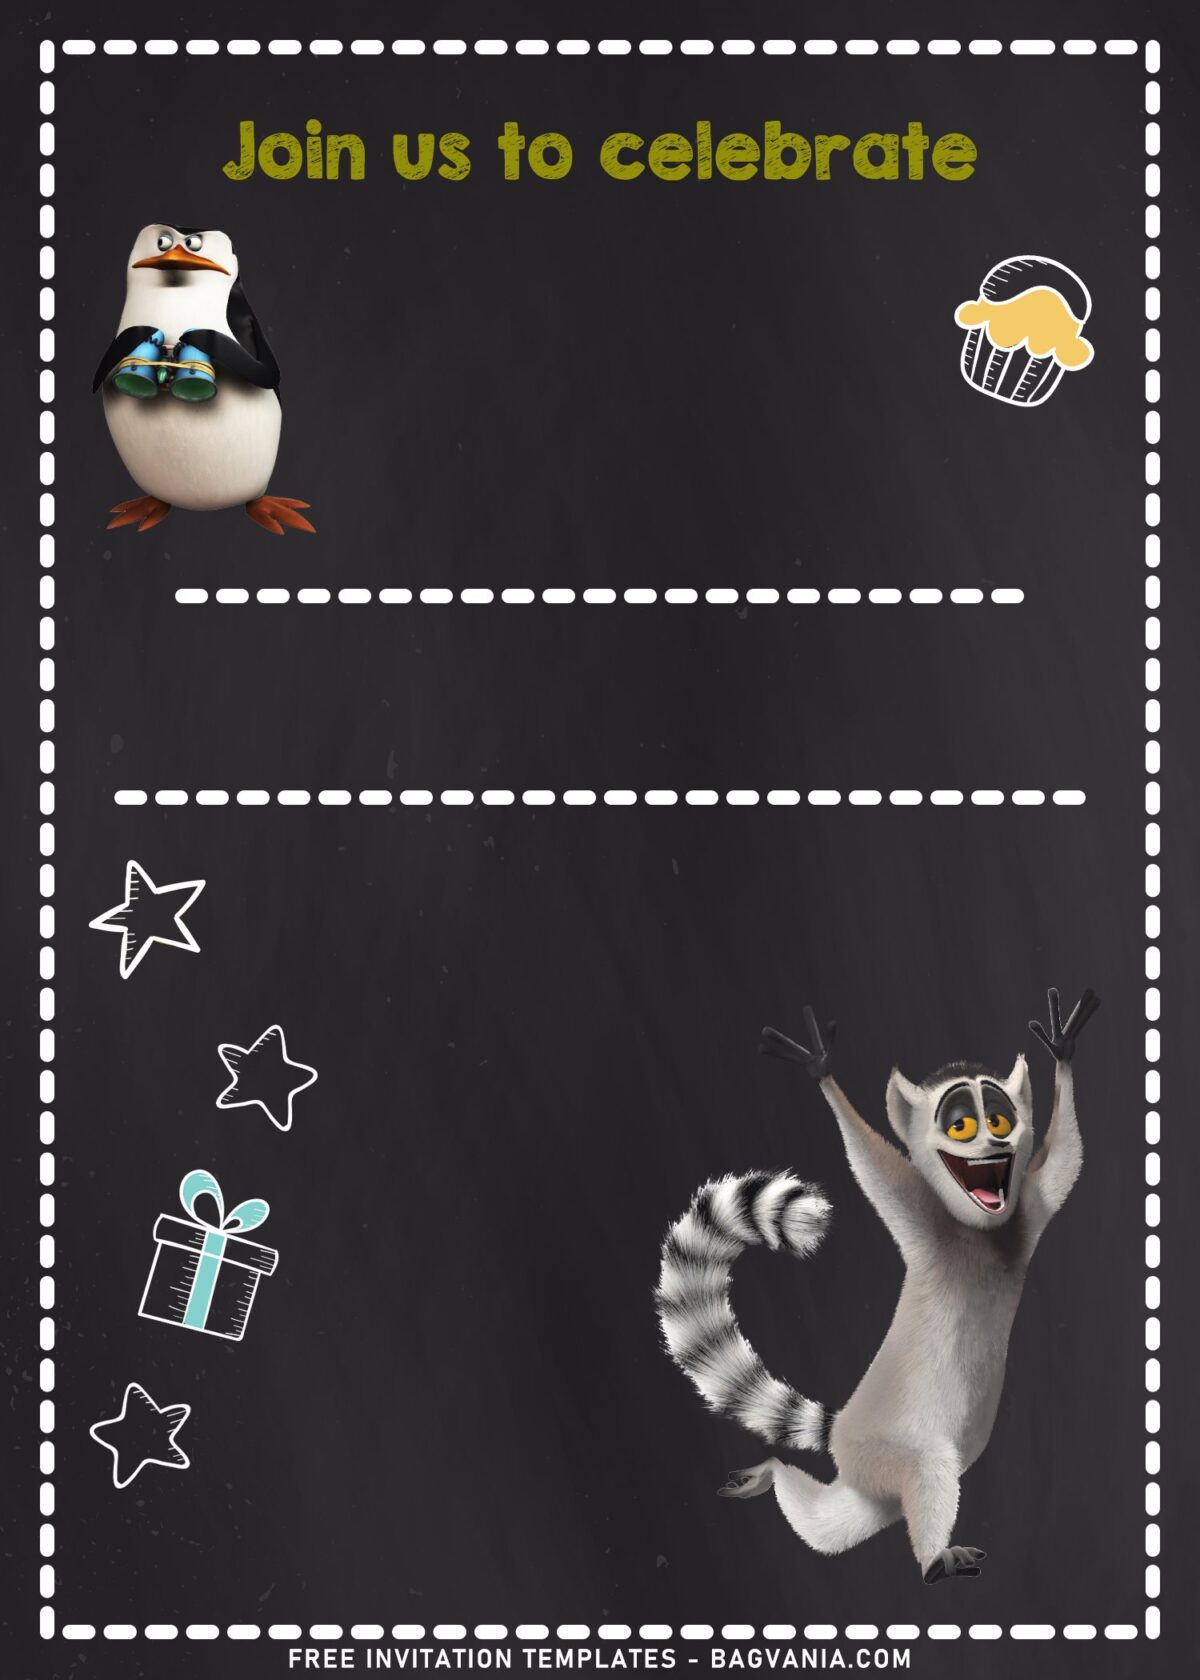 11+ Adventurous Alex And Friends Madagascar Birthday Invitation Templates with King Julien and Skipper